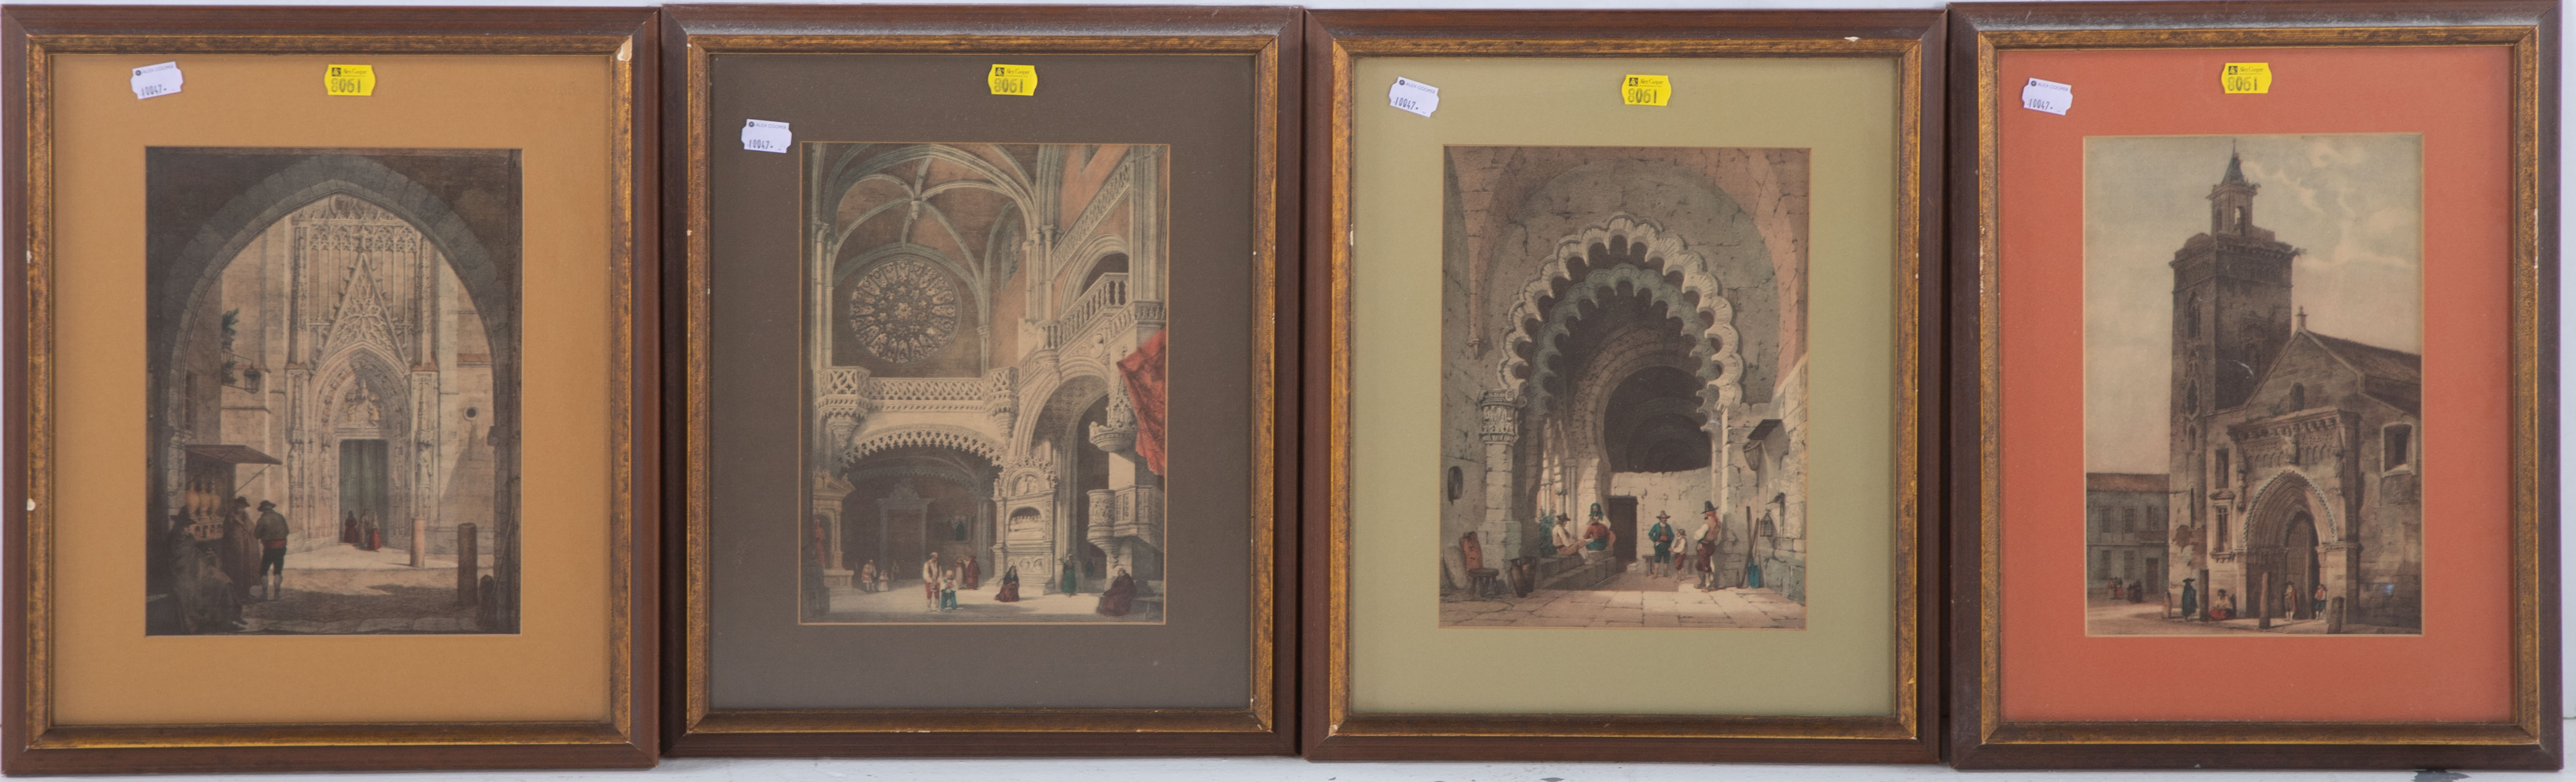 FOUR FRAMED PRINTS OF SPANISH ARCHITECTURE